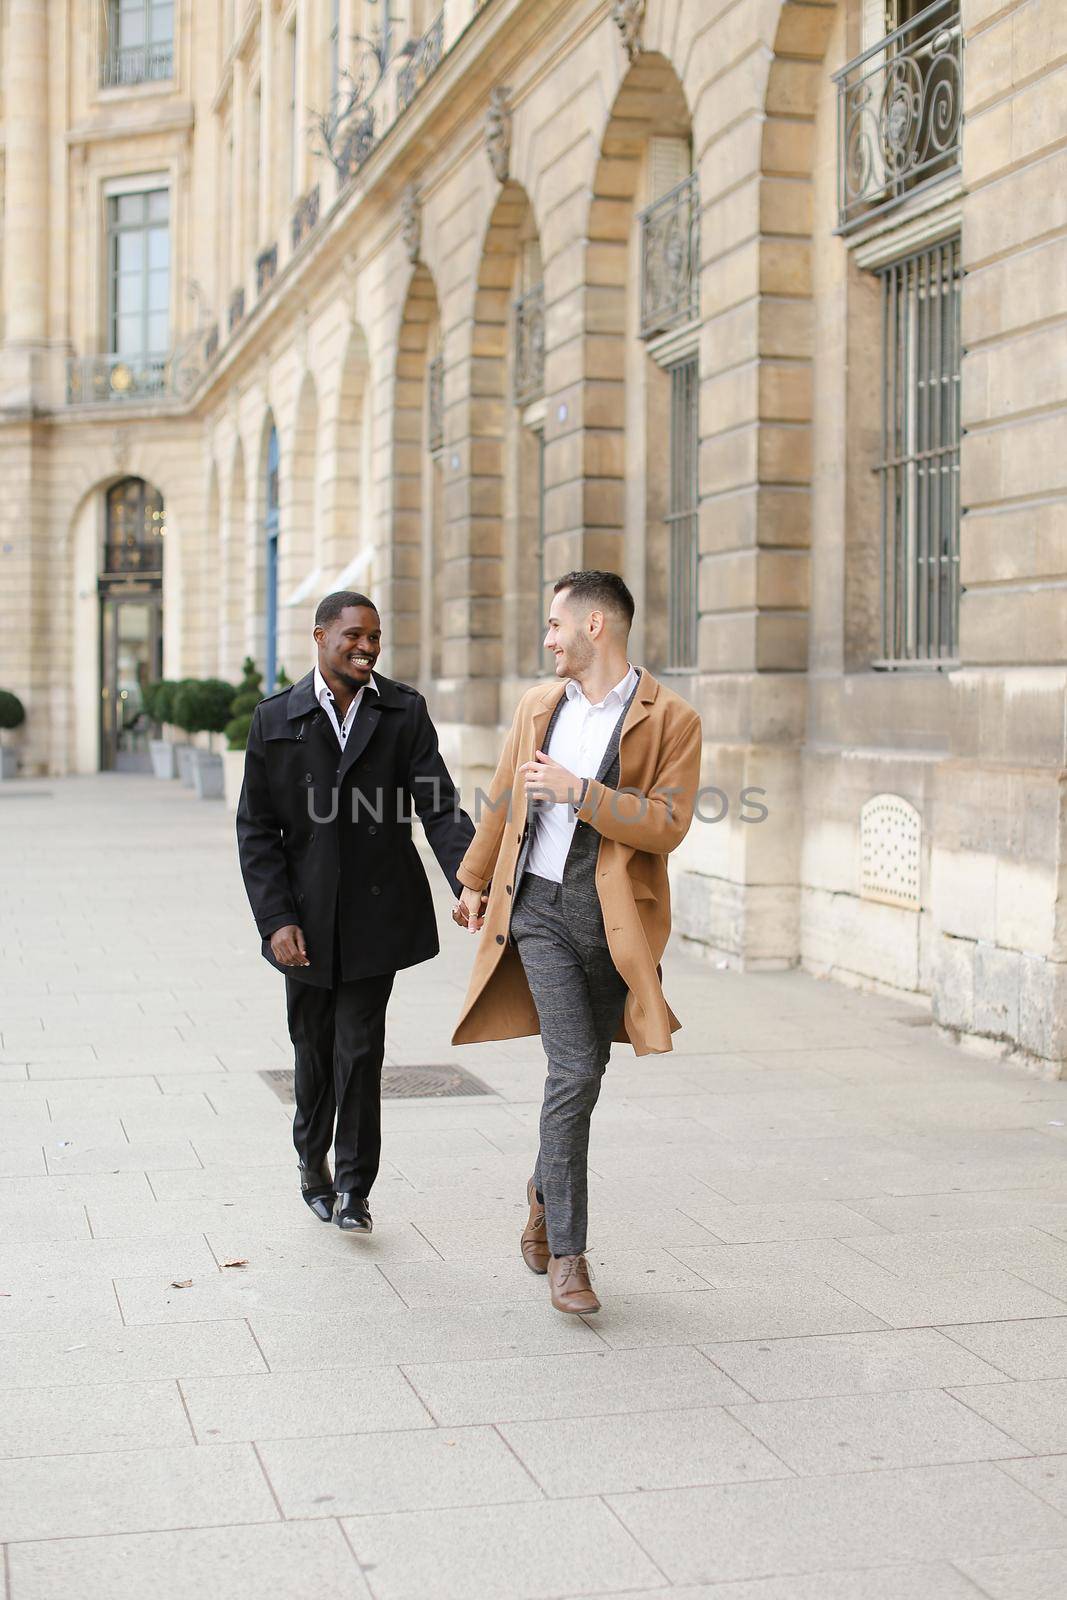 Caucasian man running with afroamerican male person and holding hands in city. by sisterspro